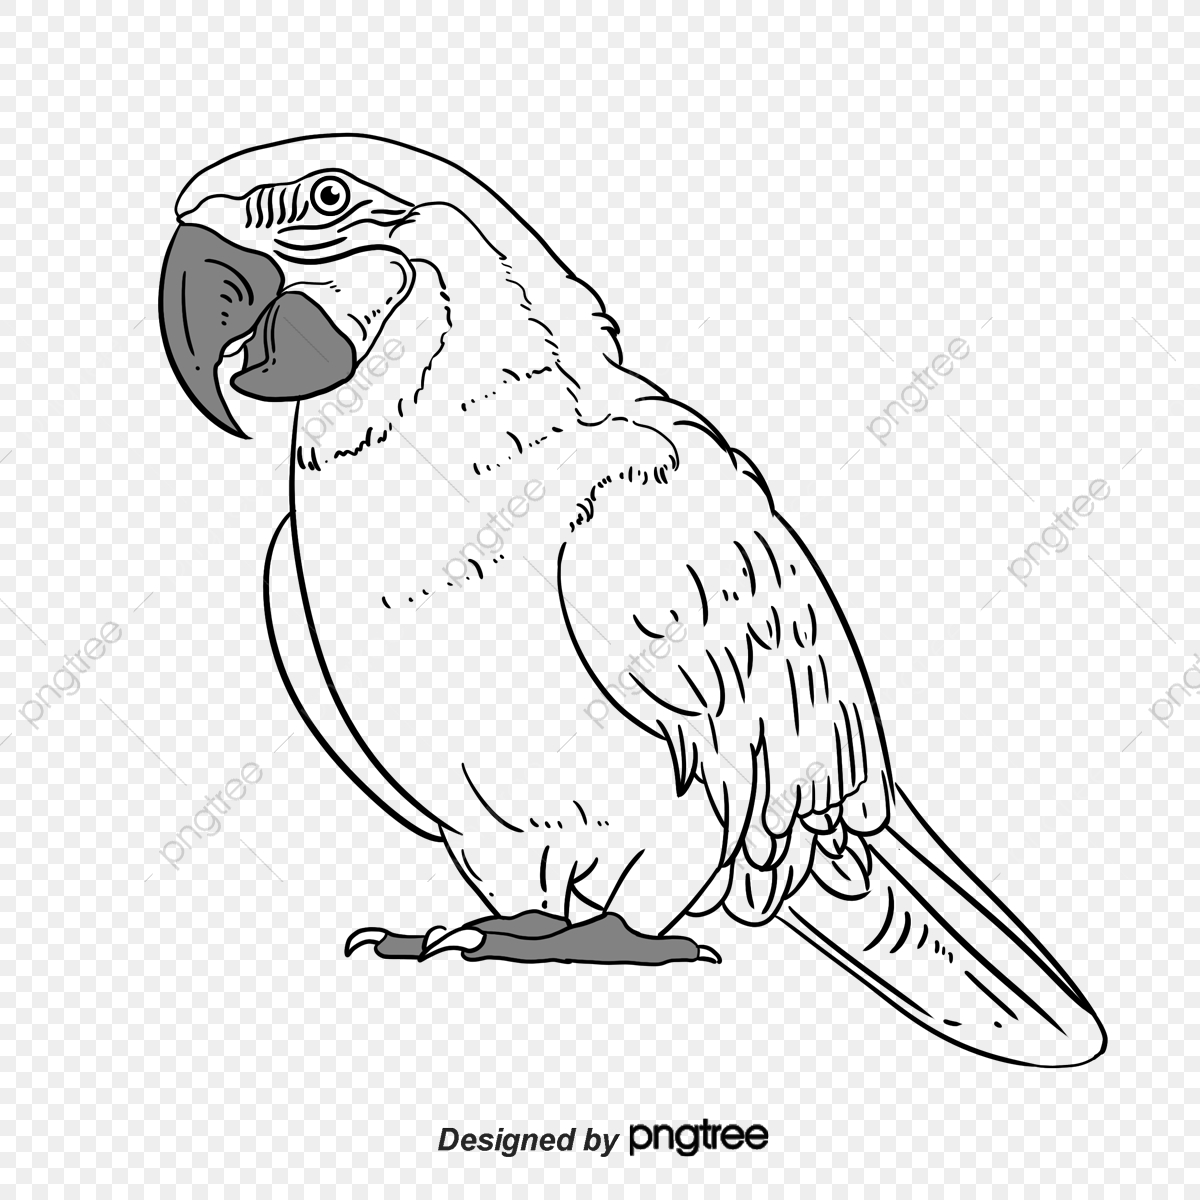 Parrot clipart tree drawing, Parrot tree drawing Transparent FREE for ...